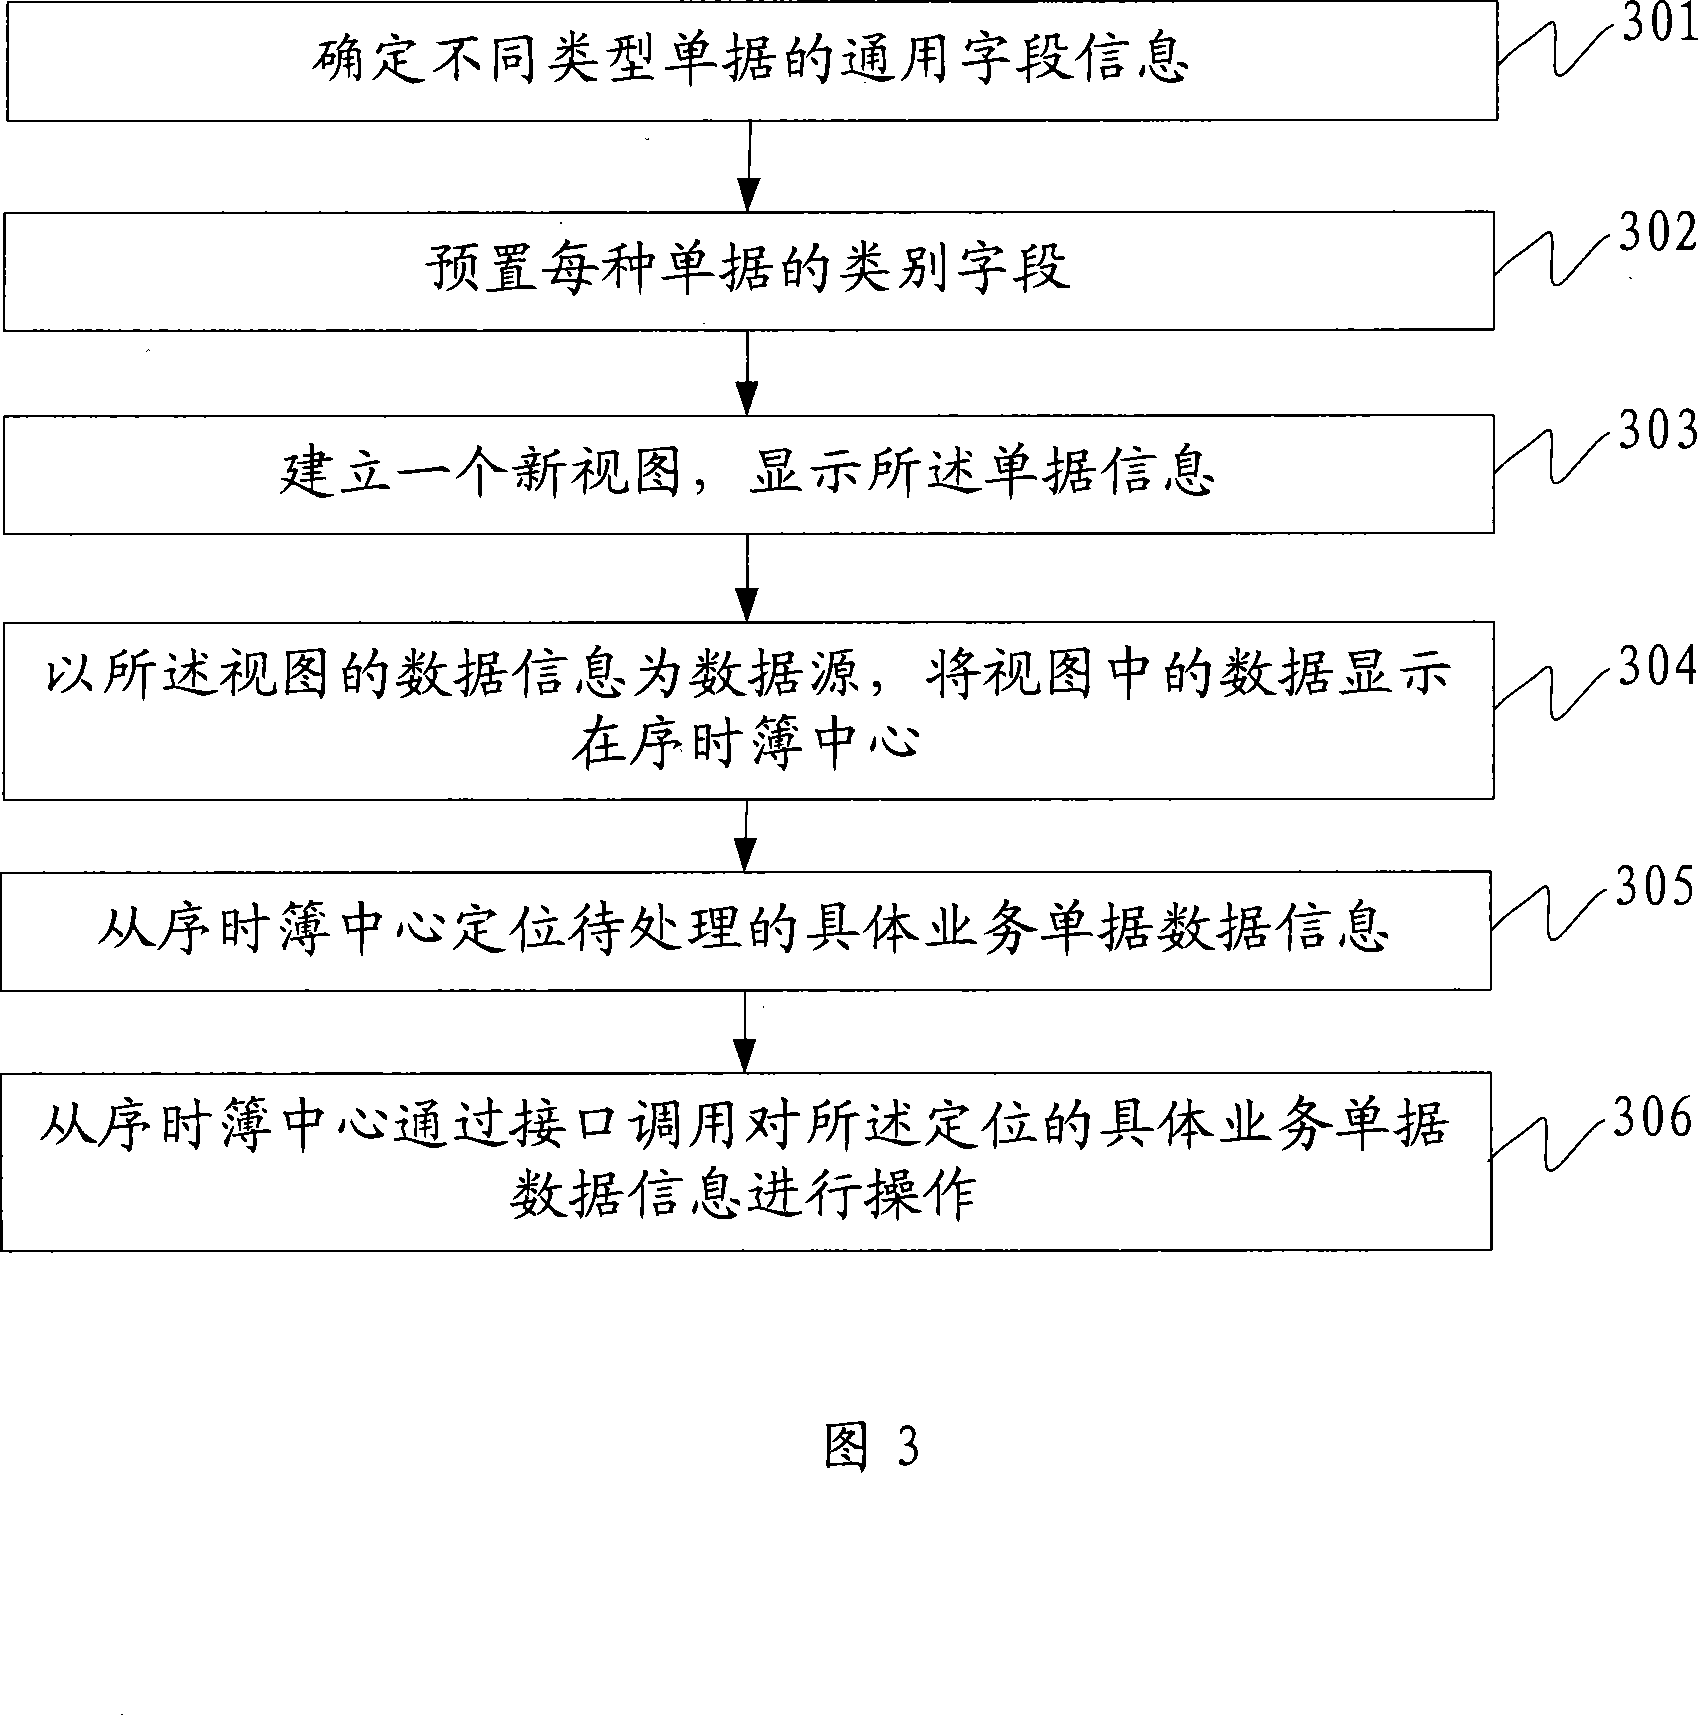 Method and system for processing multiple services bills data